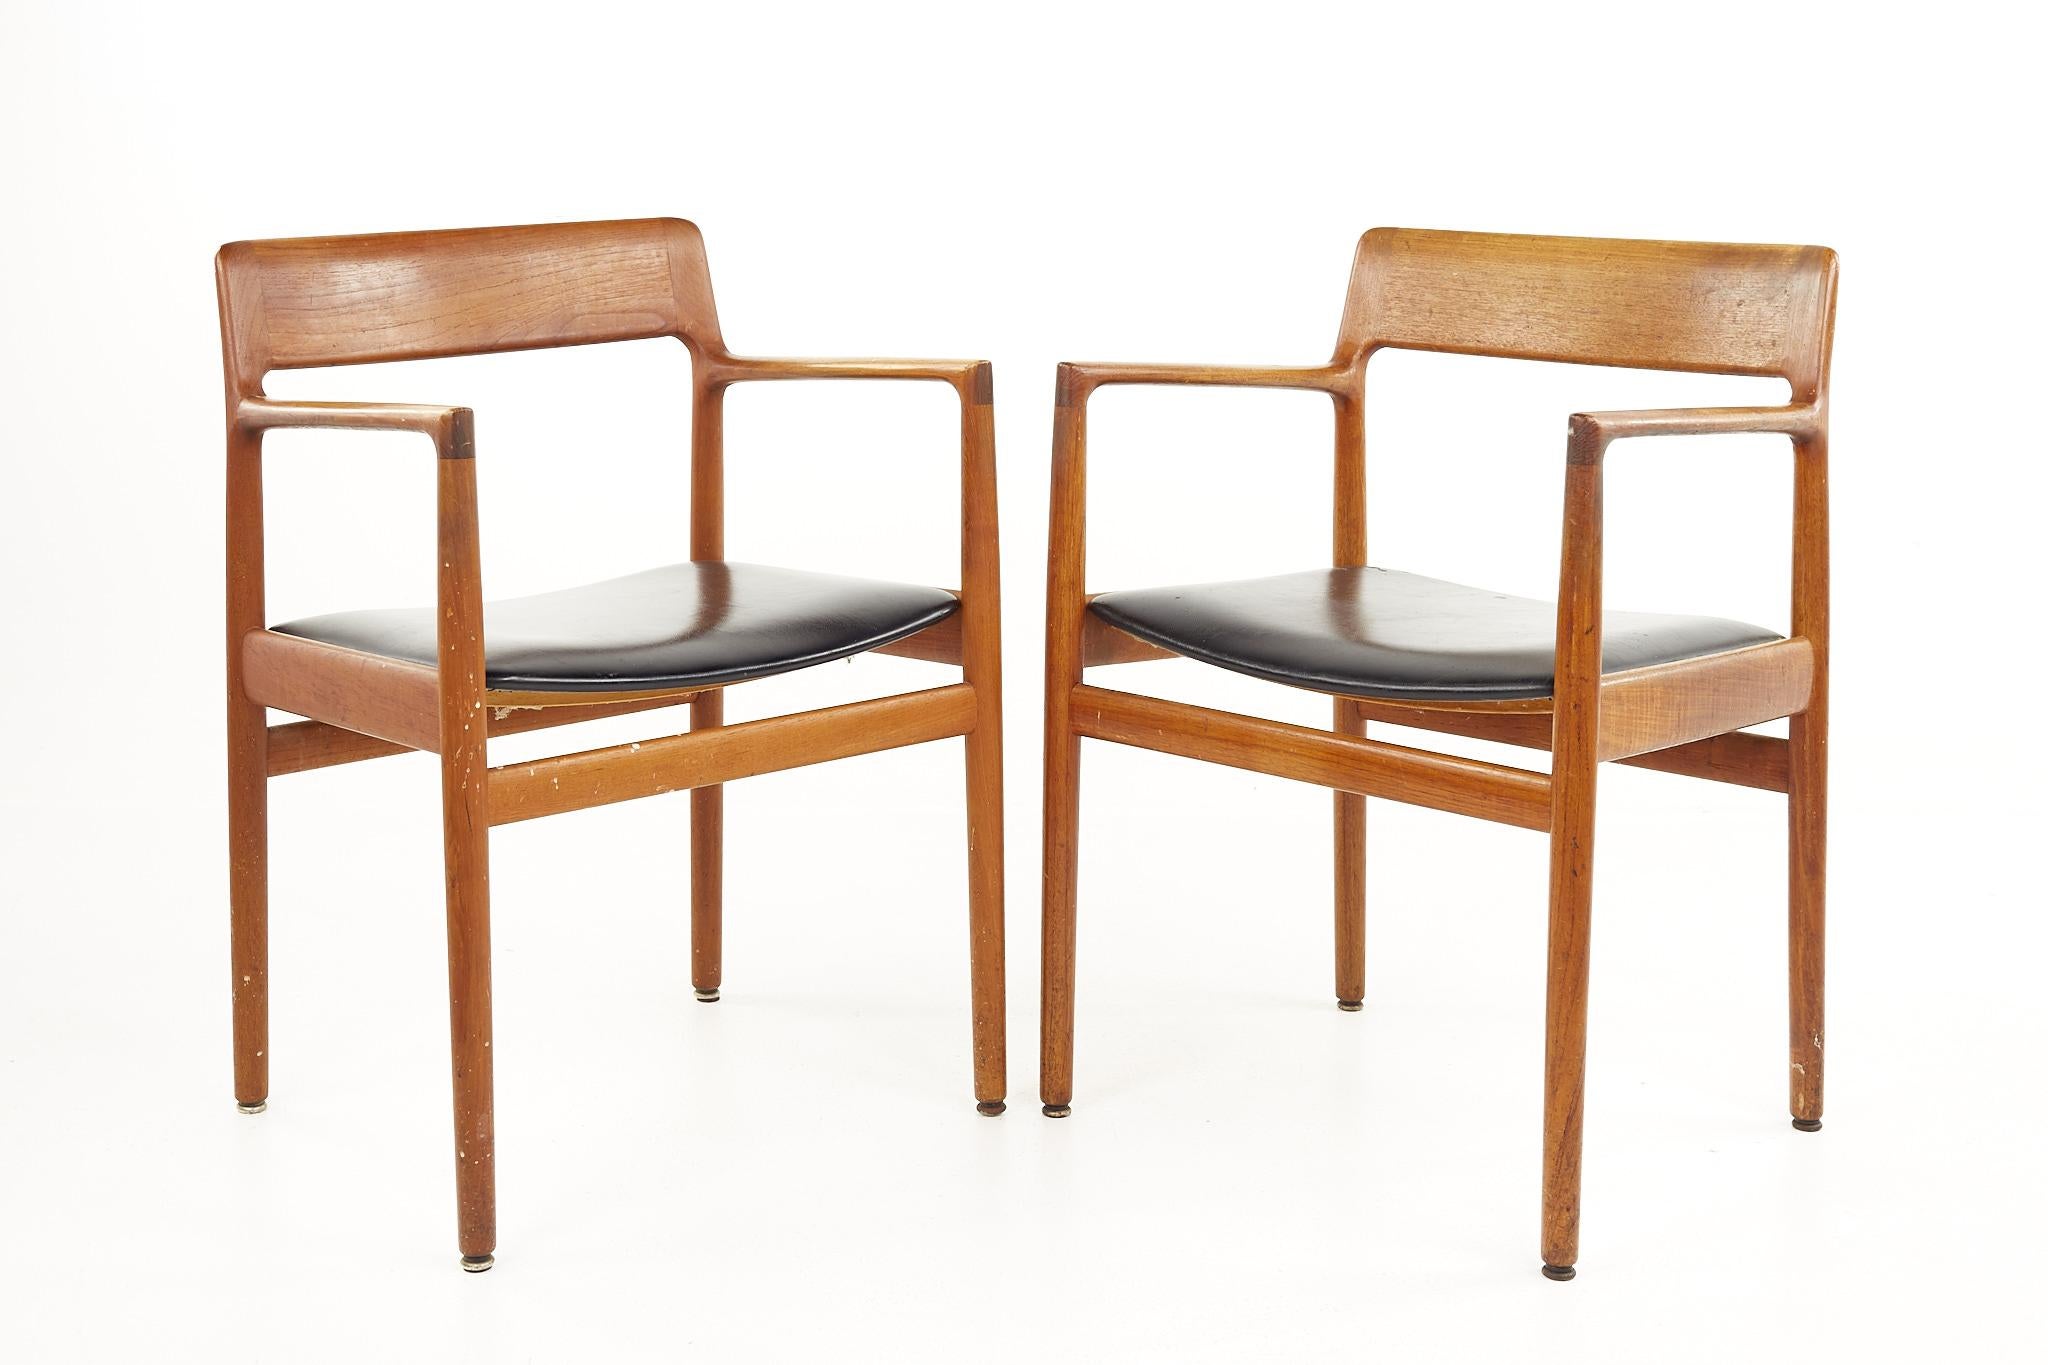 Johannes Norgaards for Norgaards Mobelfabrik mid century teak armchairs - a pair

Each chair measures: 21.5 wide x 17 deep x 30 high, with a seat height of 18 inches and arm height/chair clearance of 26 inches 

All pieces of furniture can be